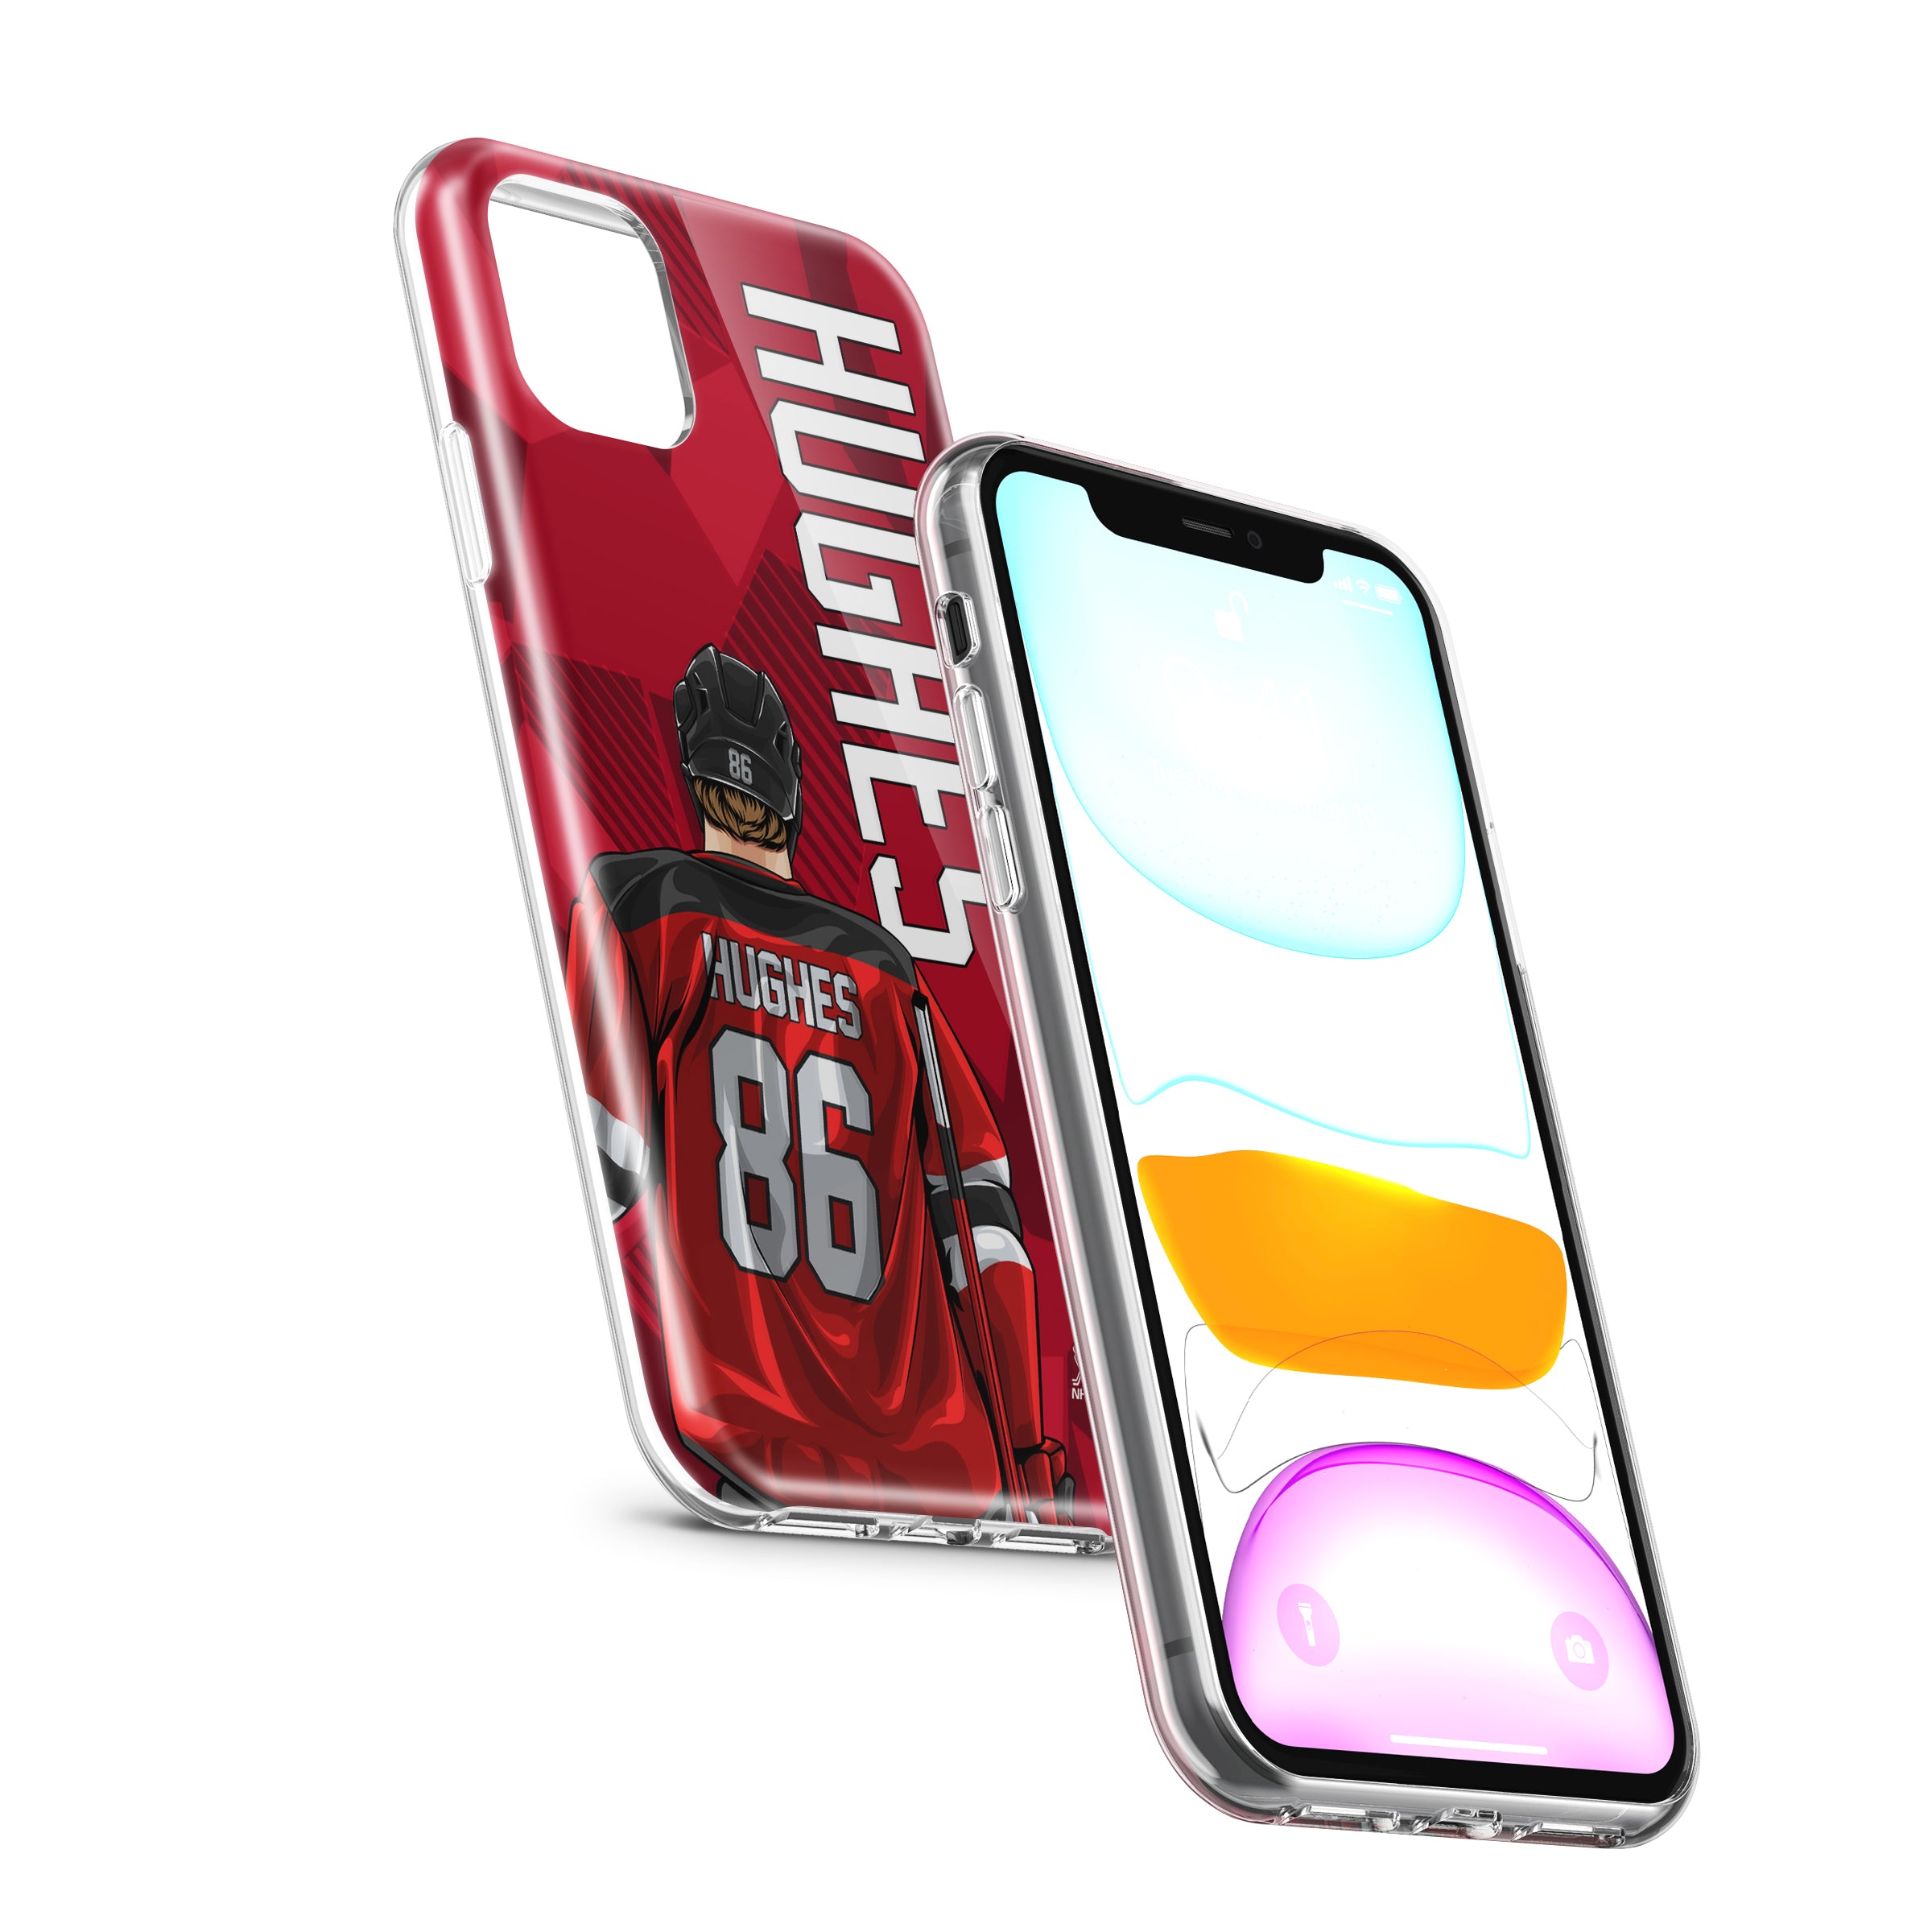 Jack Hughes iPhone Case for Sale by sarah10917